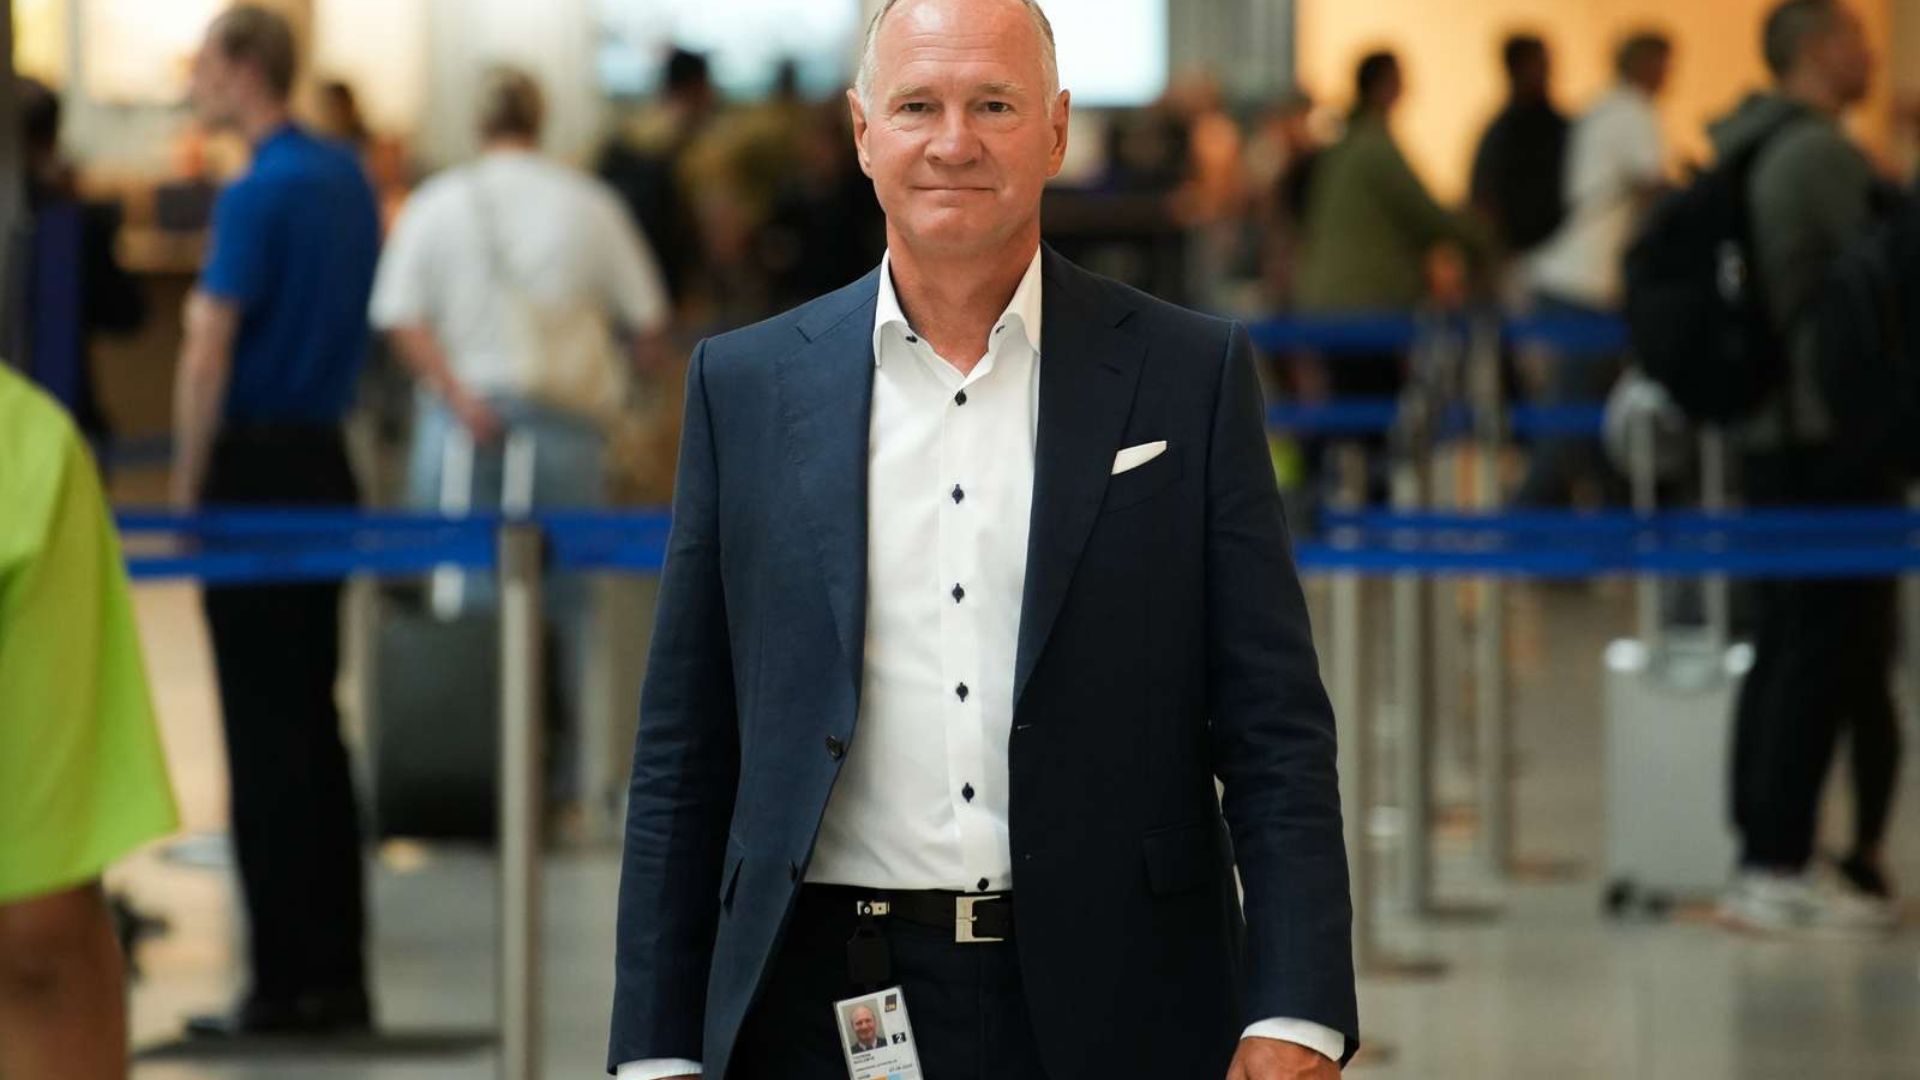 Thomas Woldbye forlader CPH for at blive adm. direktør for Heathrow Airport. (Foto: Jakob